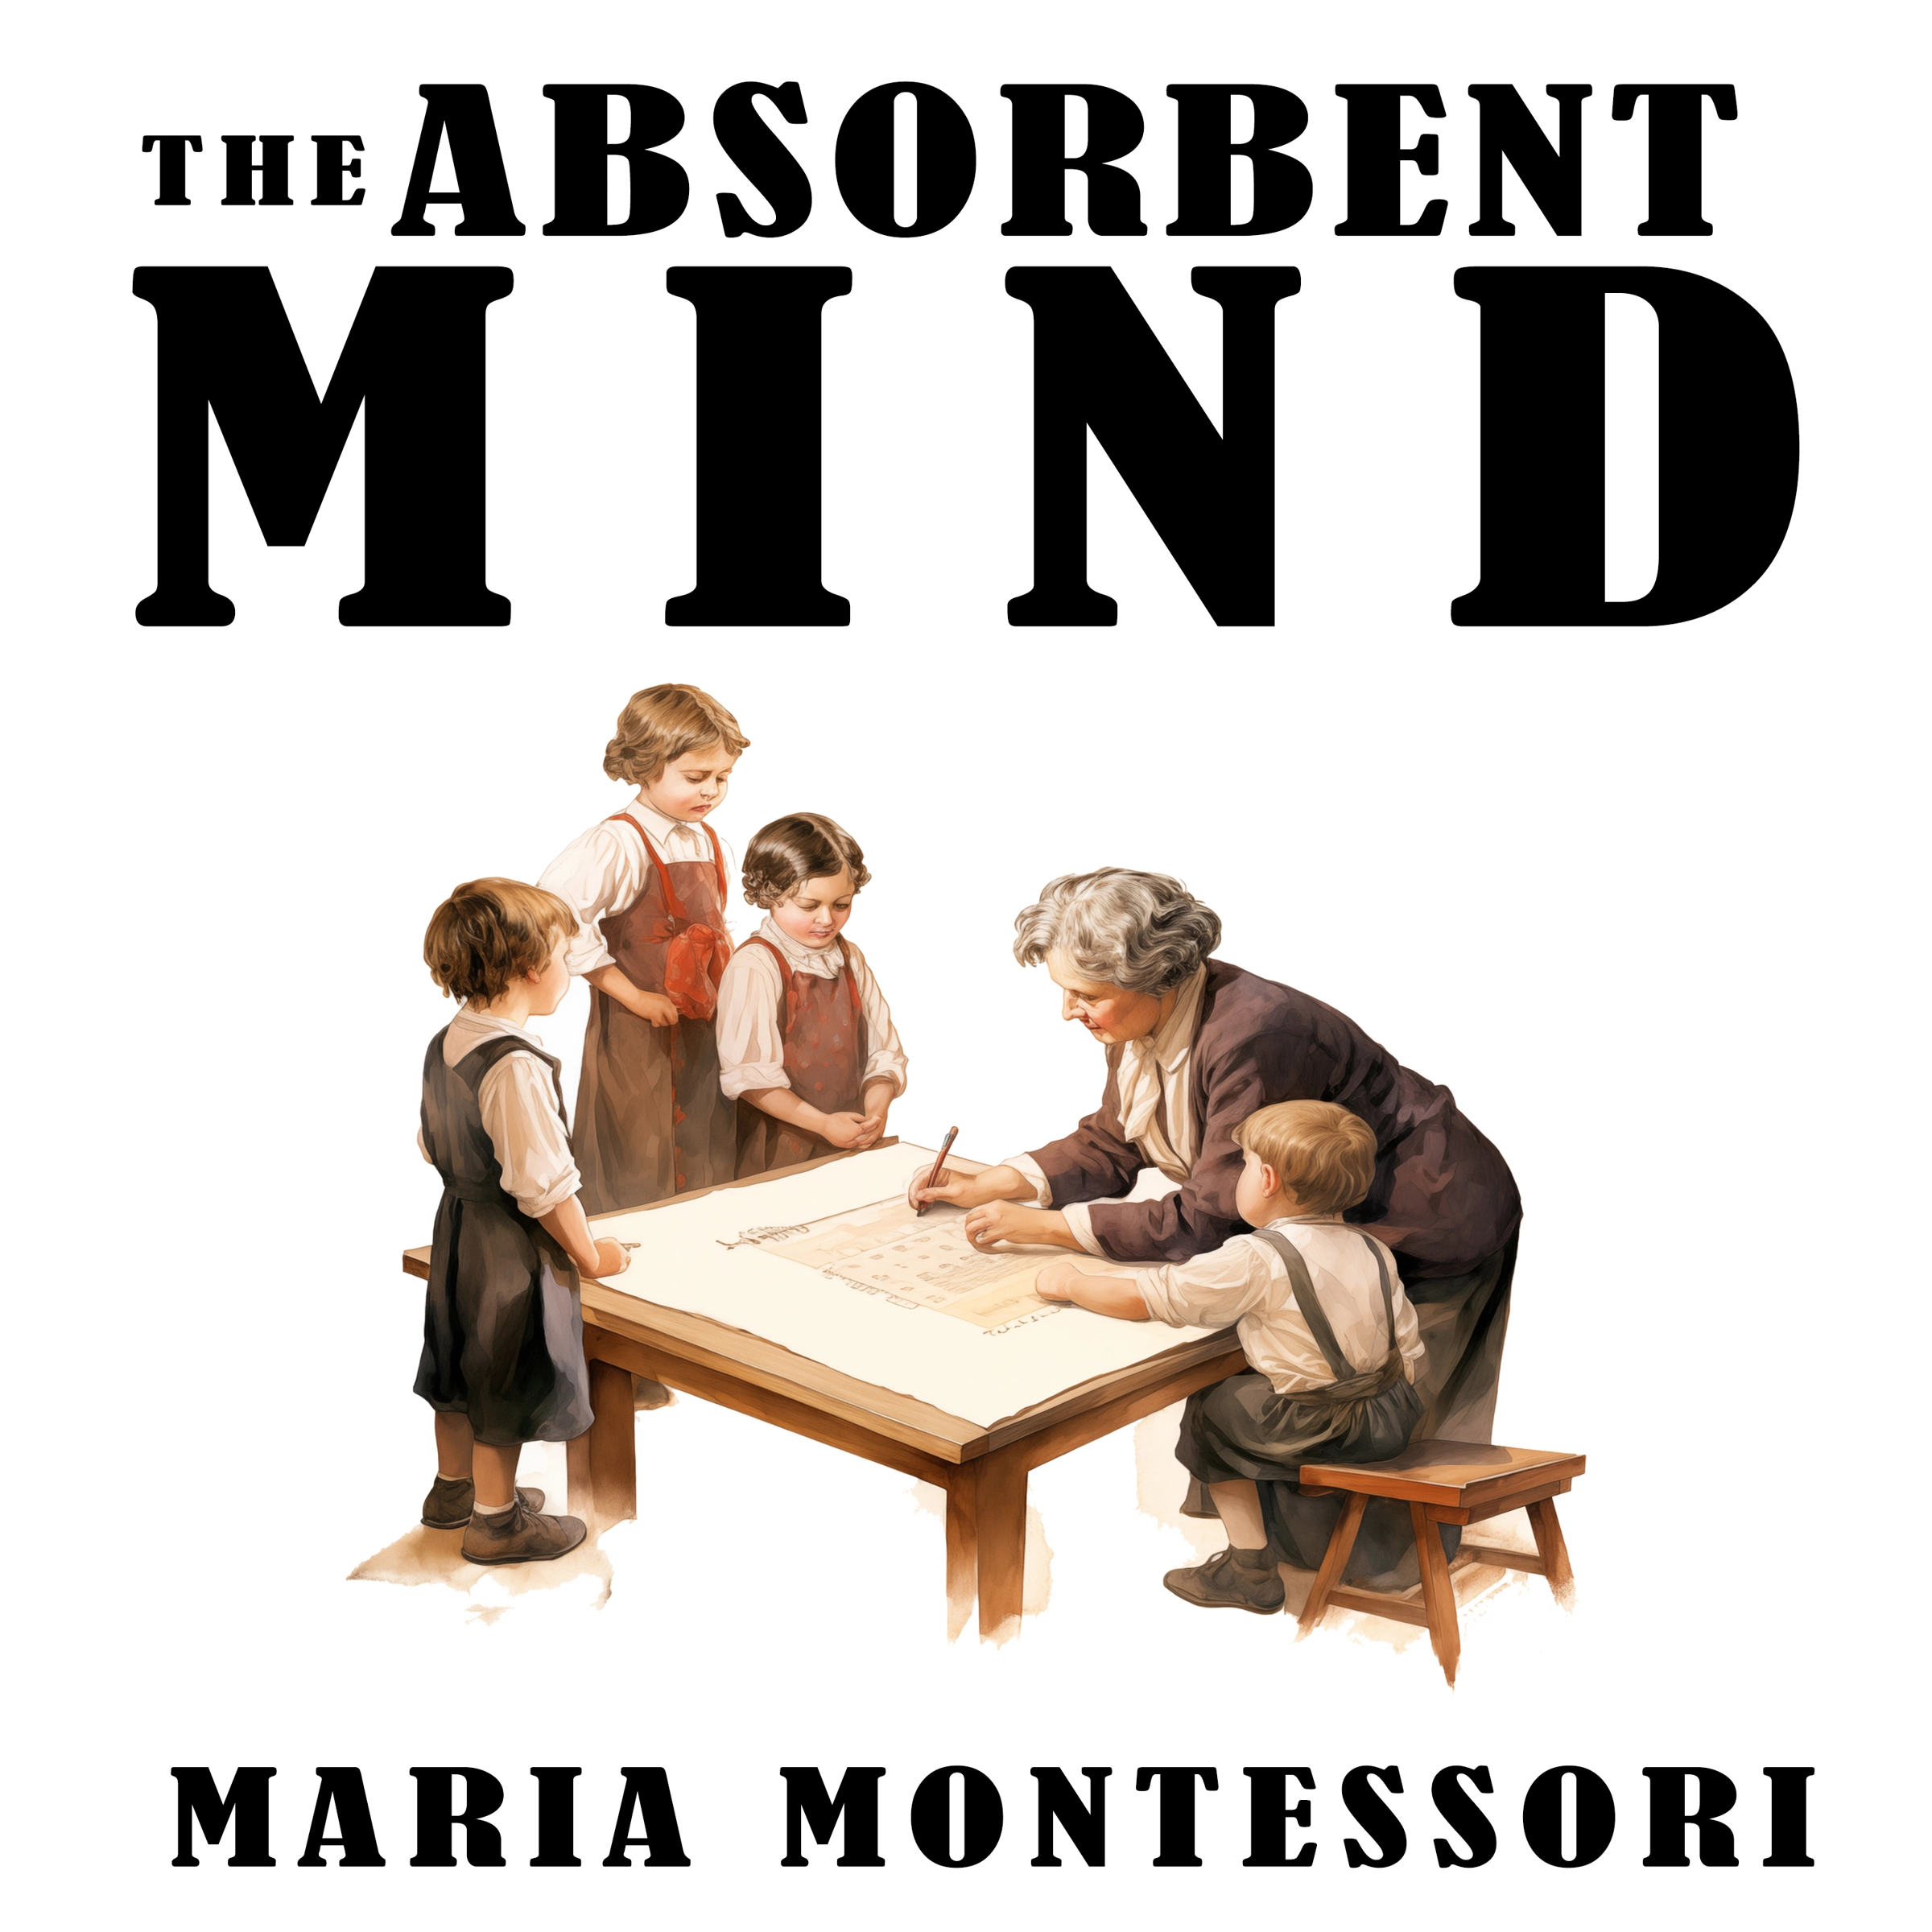 The Absorbent Mind Audiobook by Maria Montessori